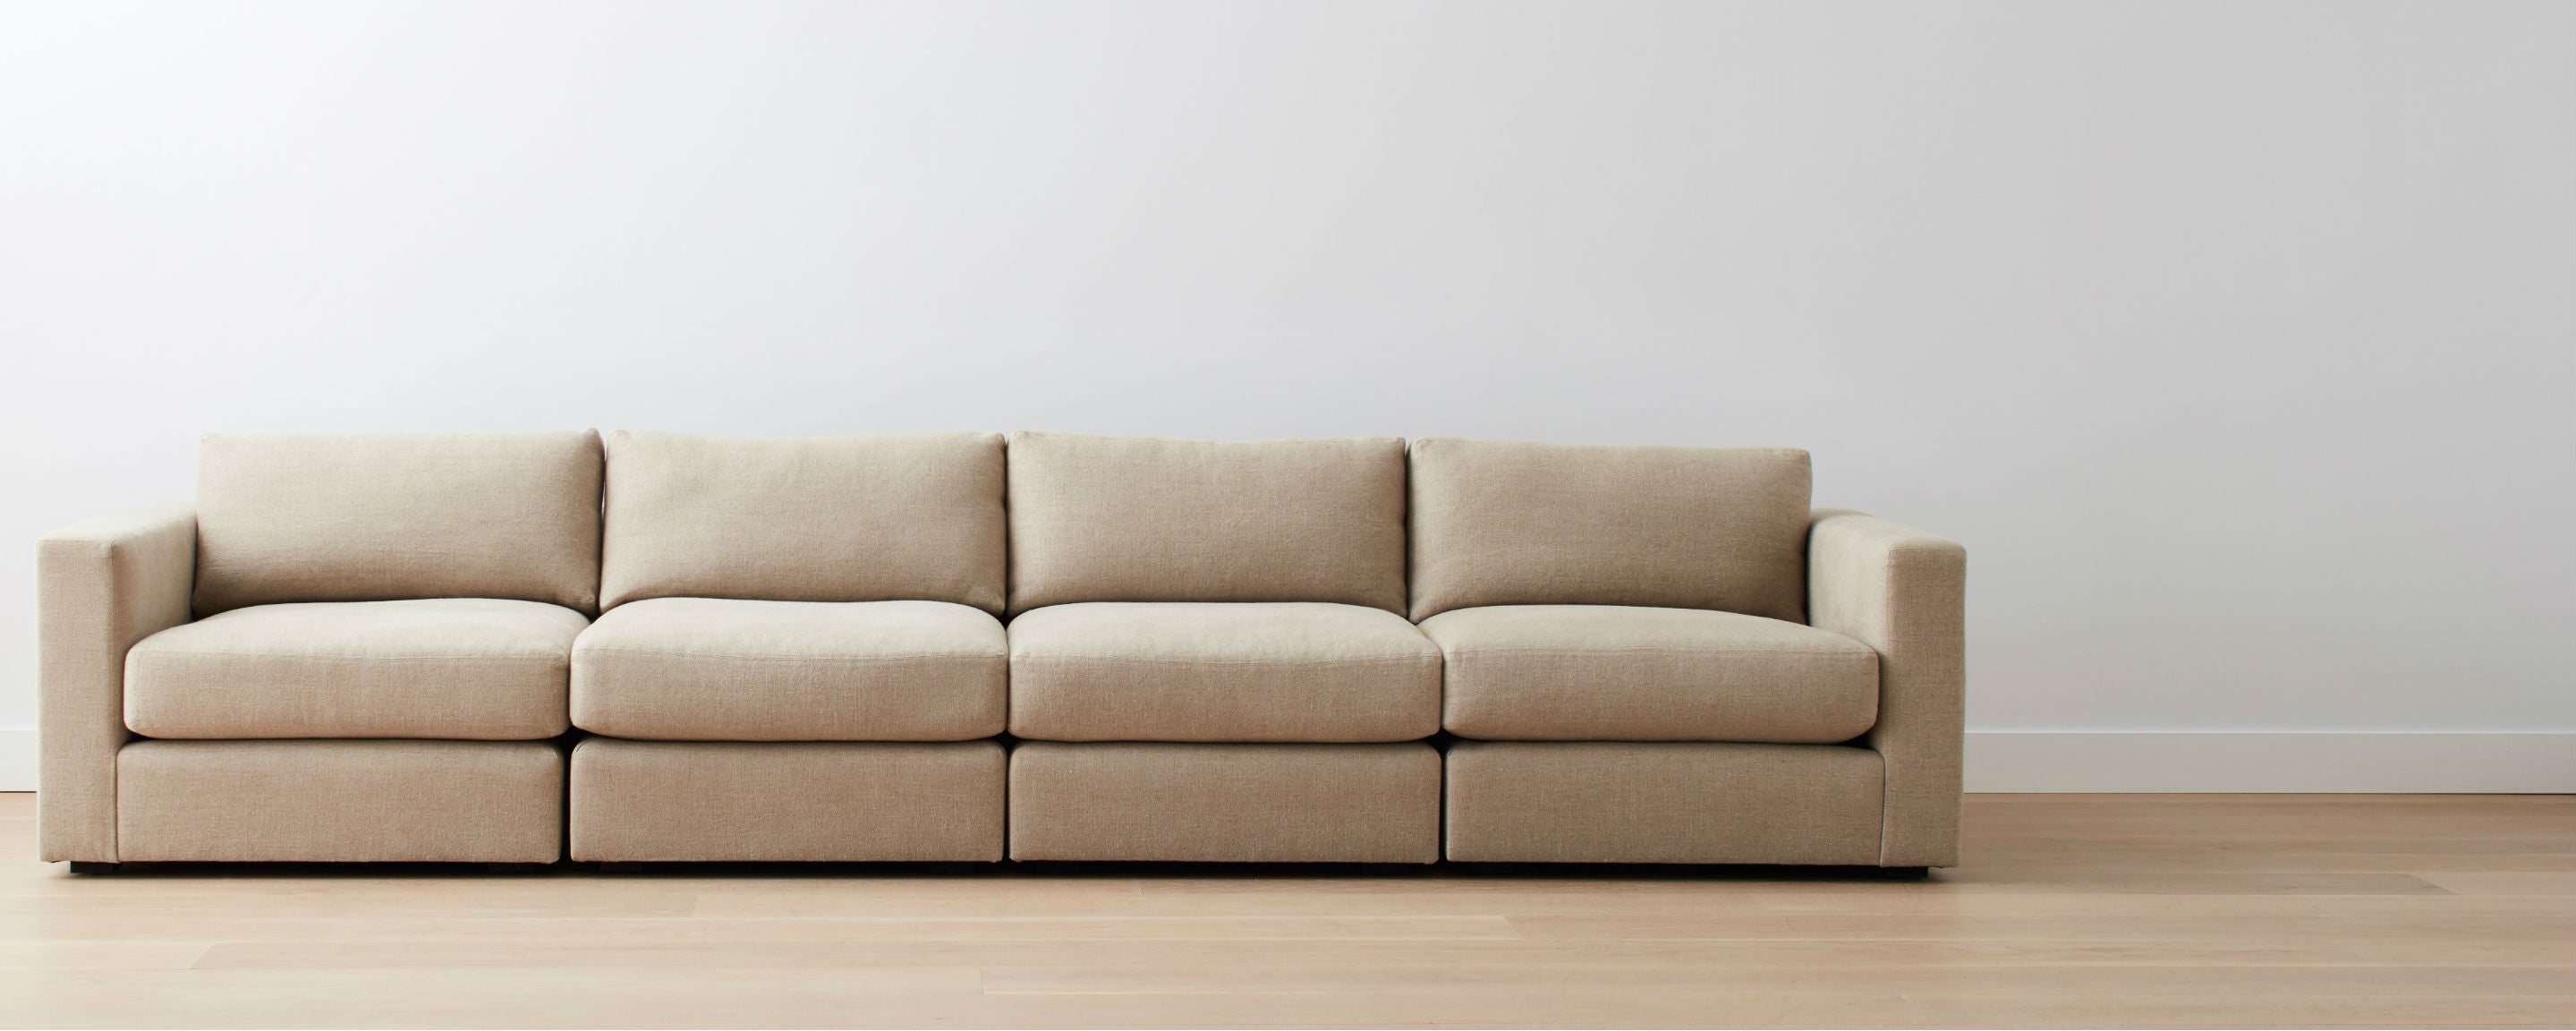 the homenature gramercy sectional